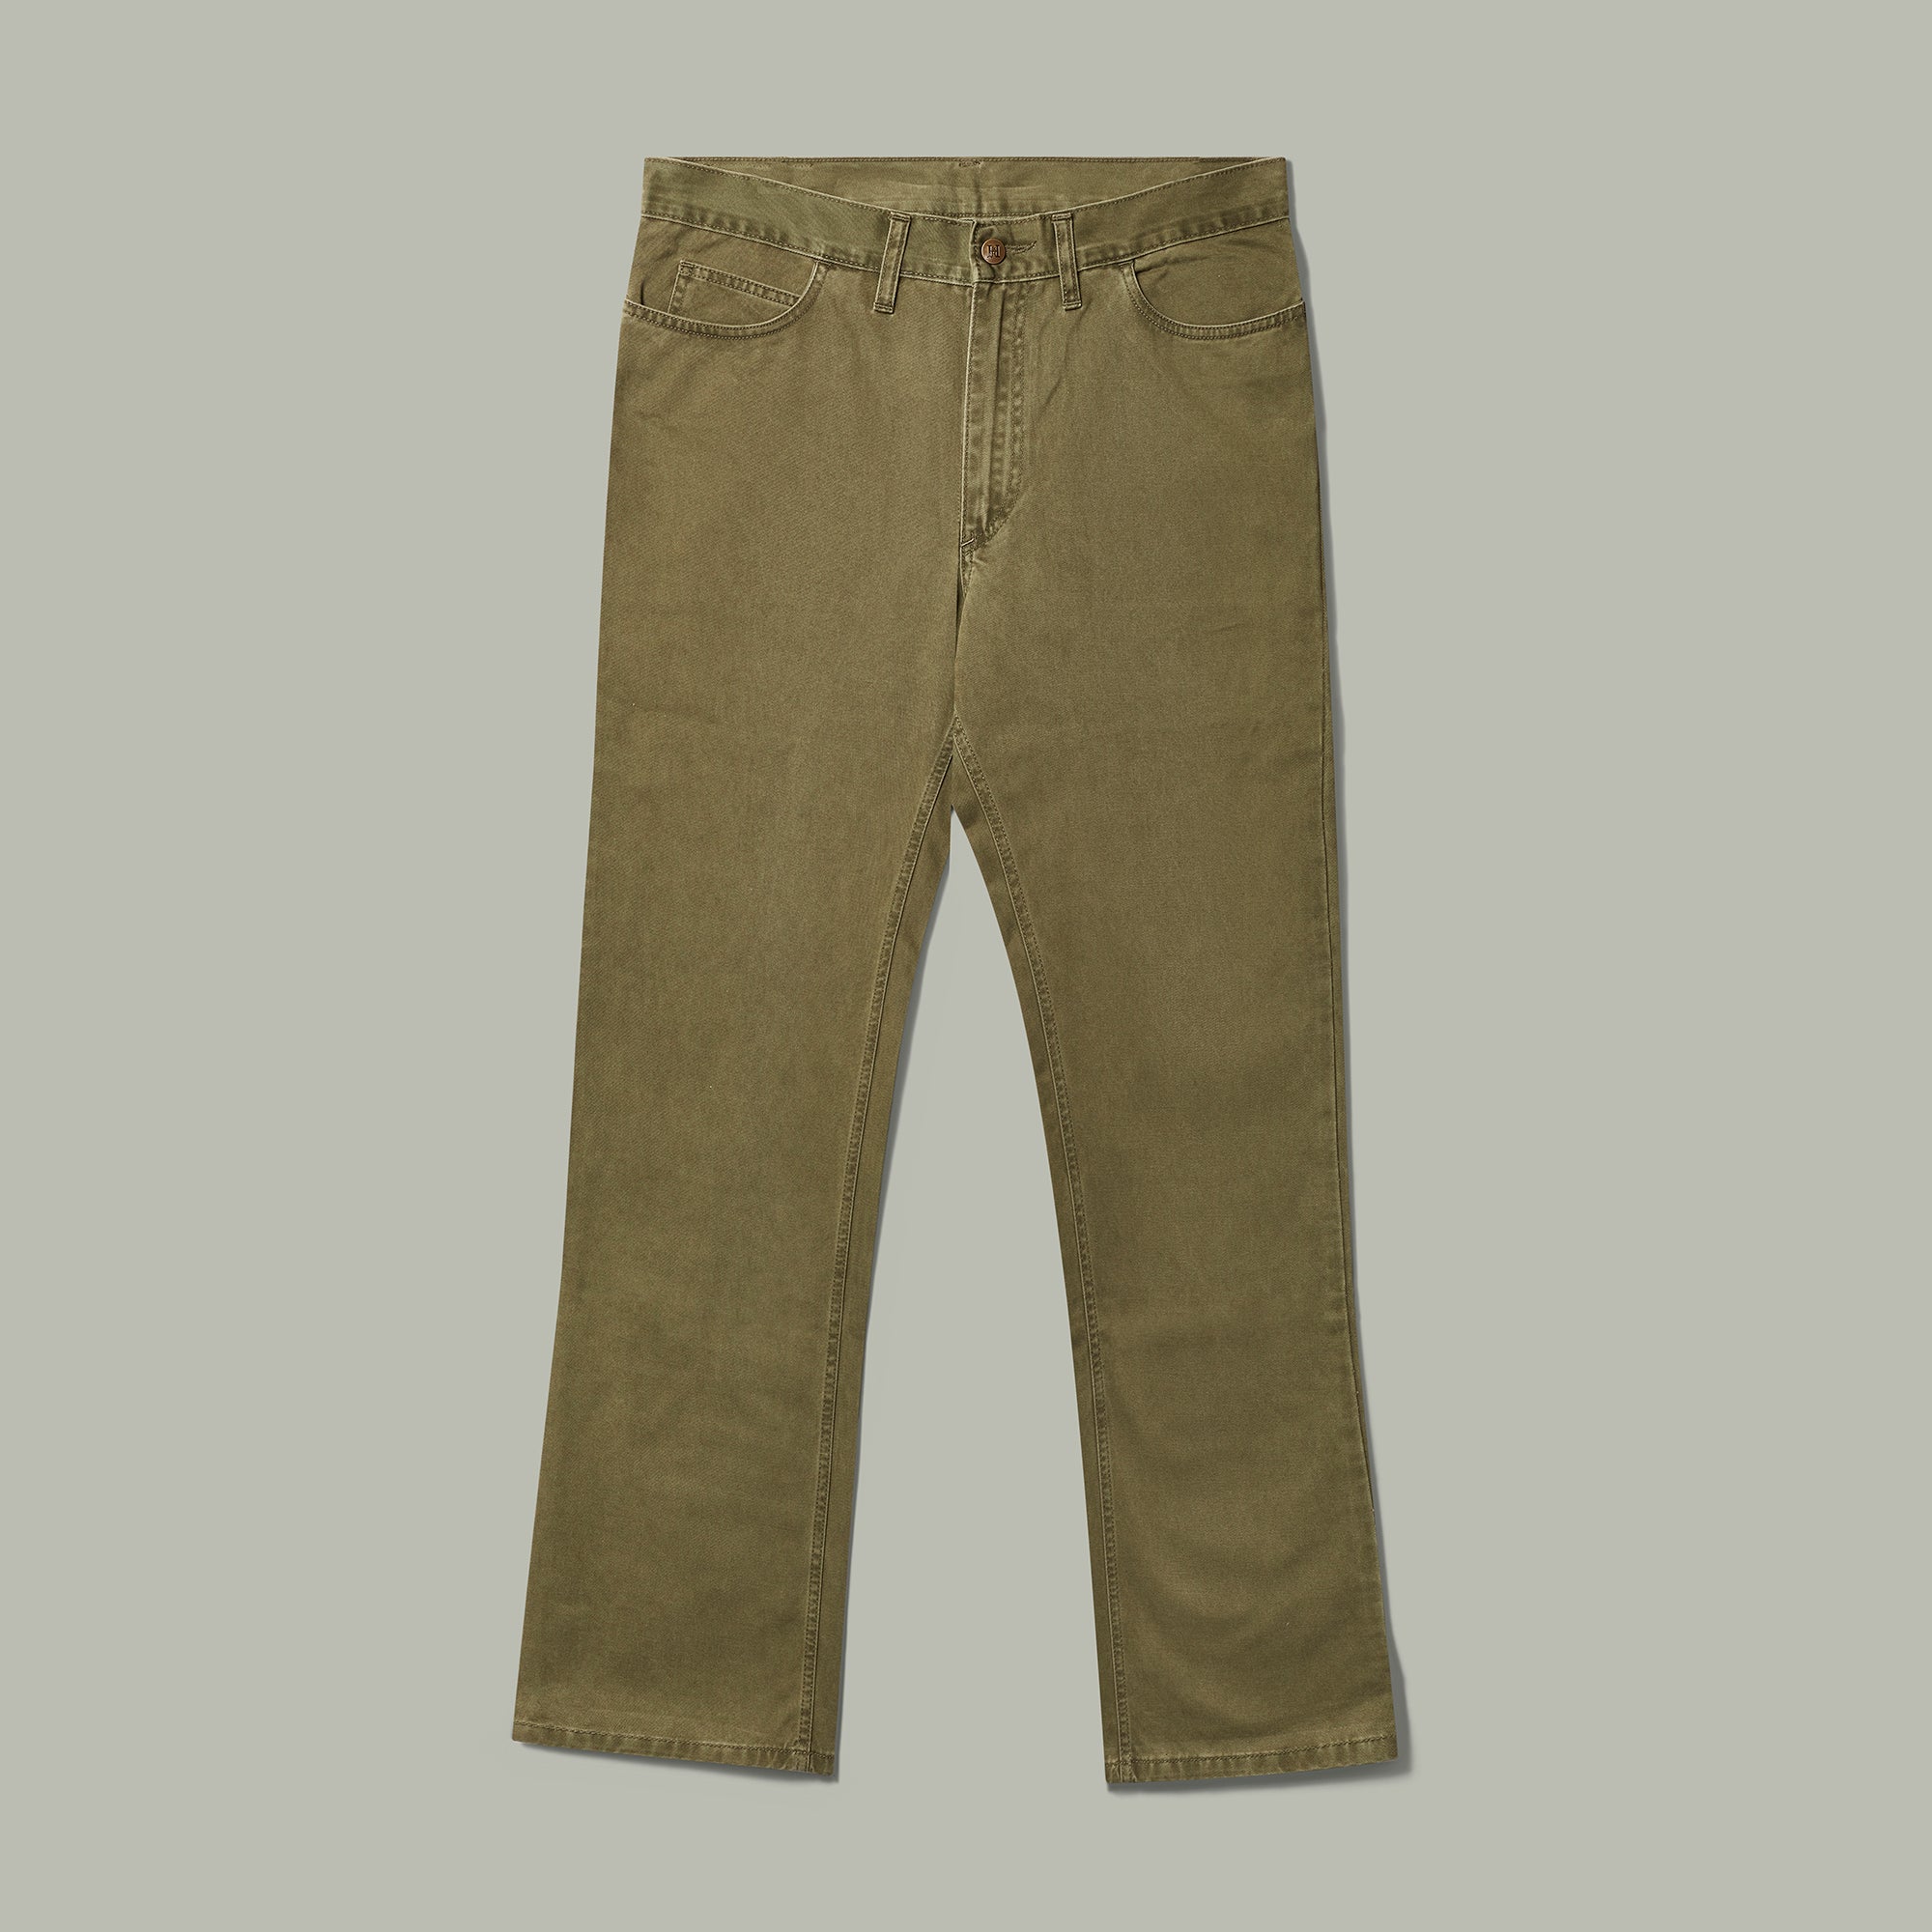 Buy Jeans Cargo Pants Khaki Pants Near Me Office Trousers Mens Sports Track  Pants Dixcy Track Pants Khaki Pants Readymade Coat Pant Trousers Mens Brown  Pants Outfit Men Chino Jeans Pants Mens